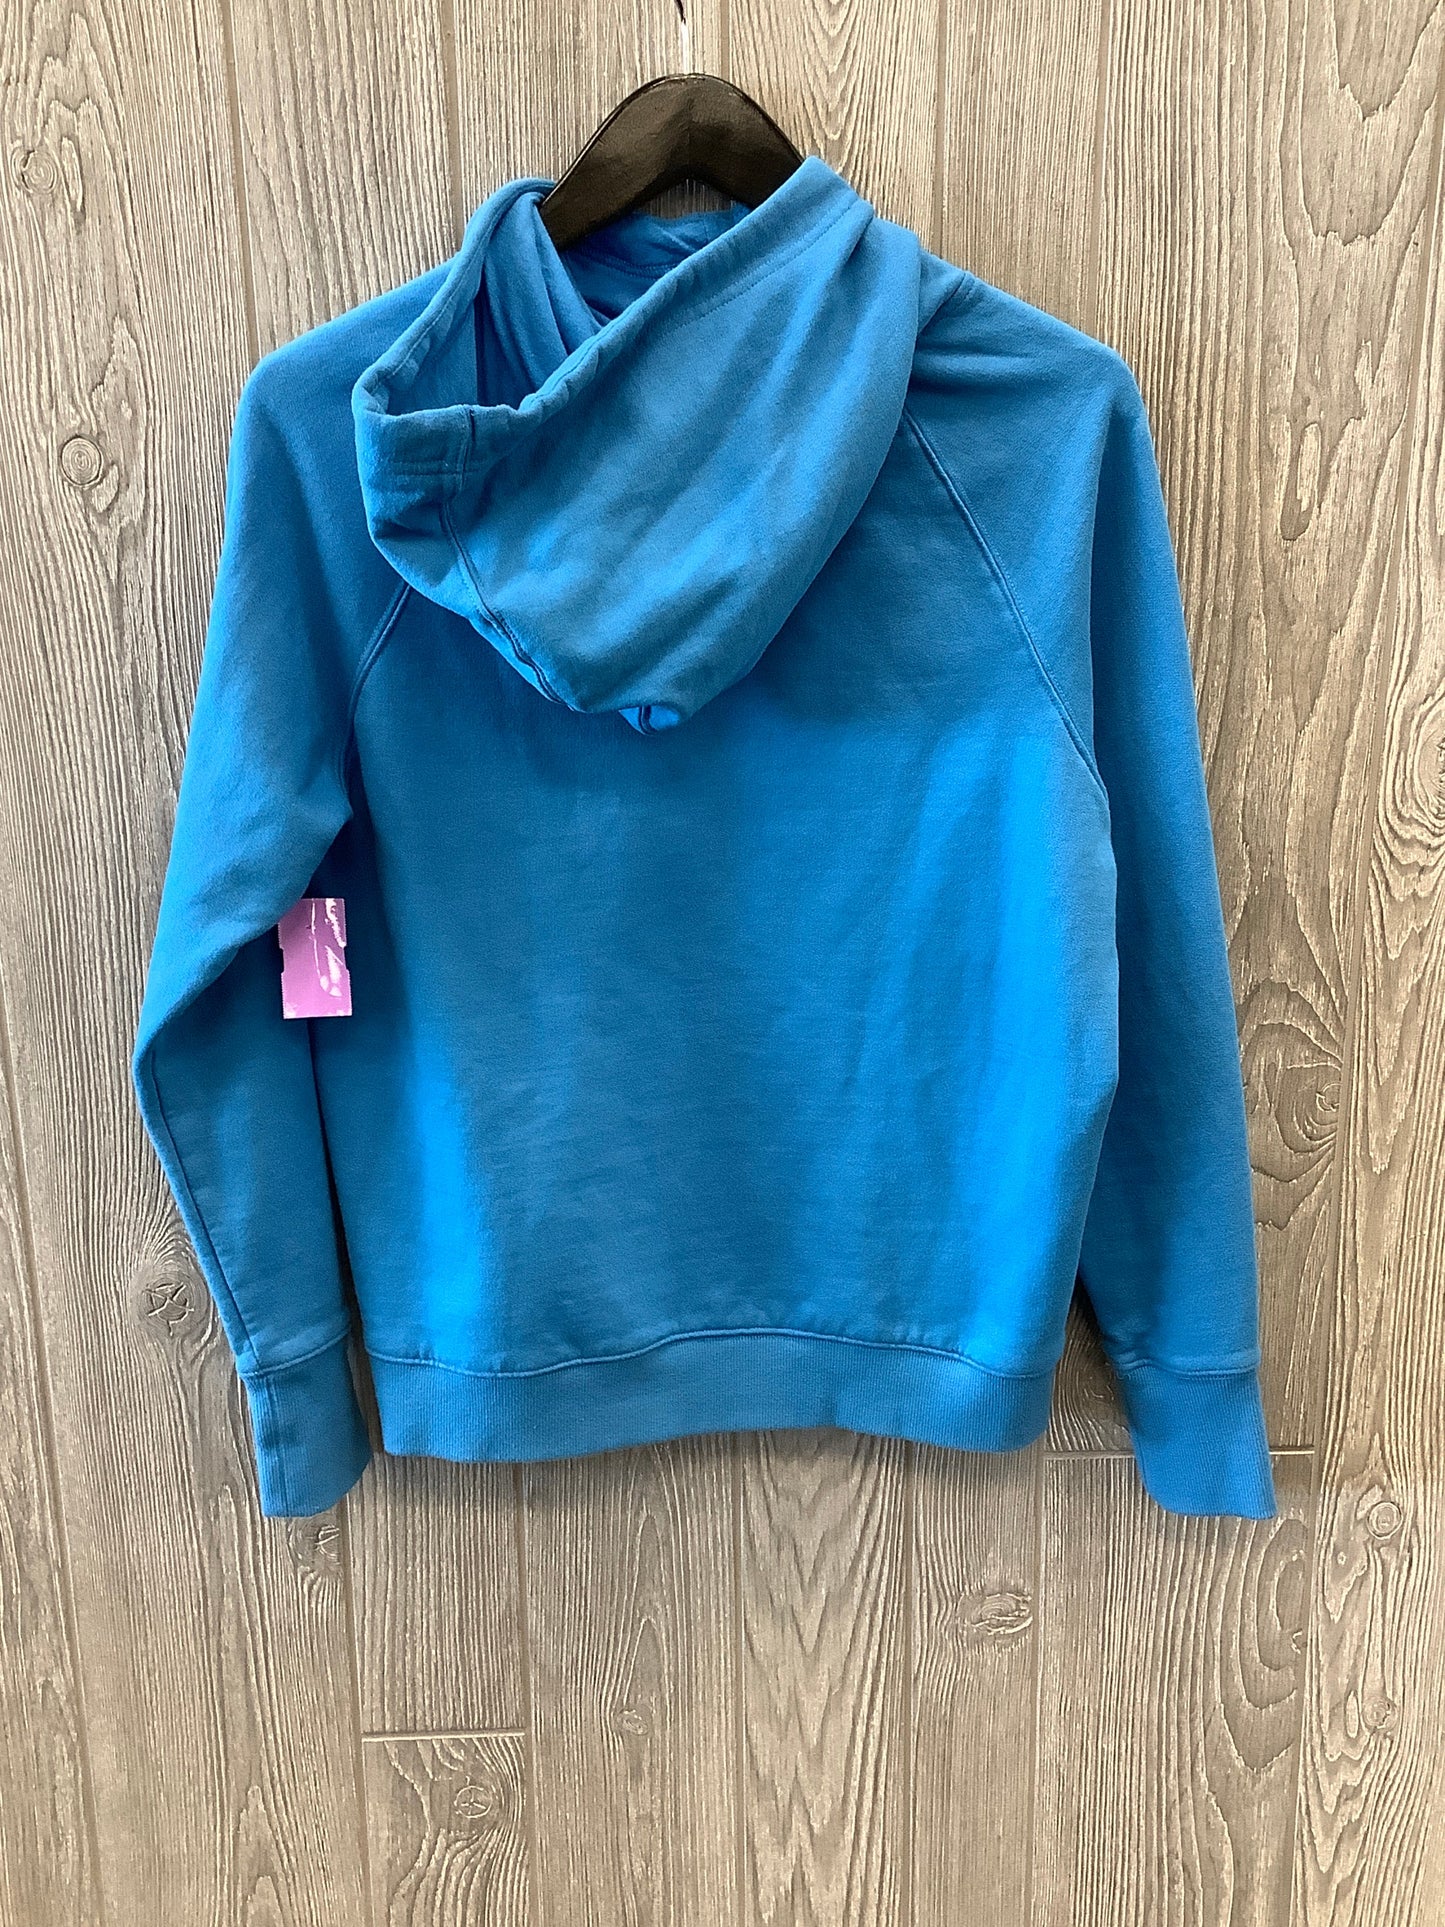 Athletic Sweatshirt Hoodie By Champion  Size: S